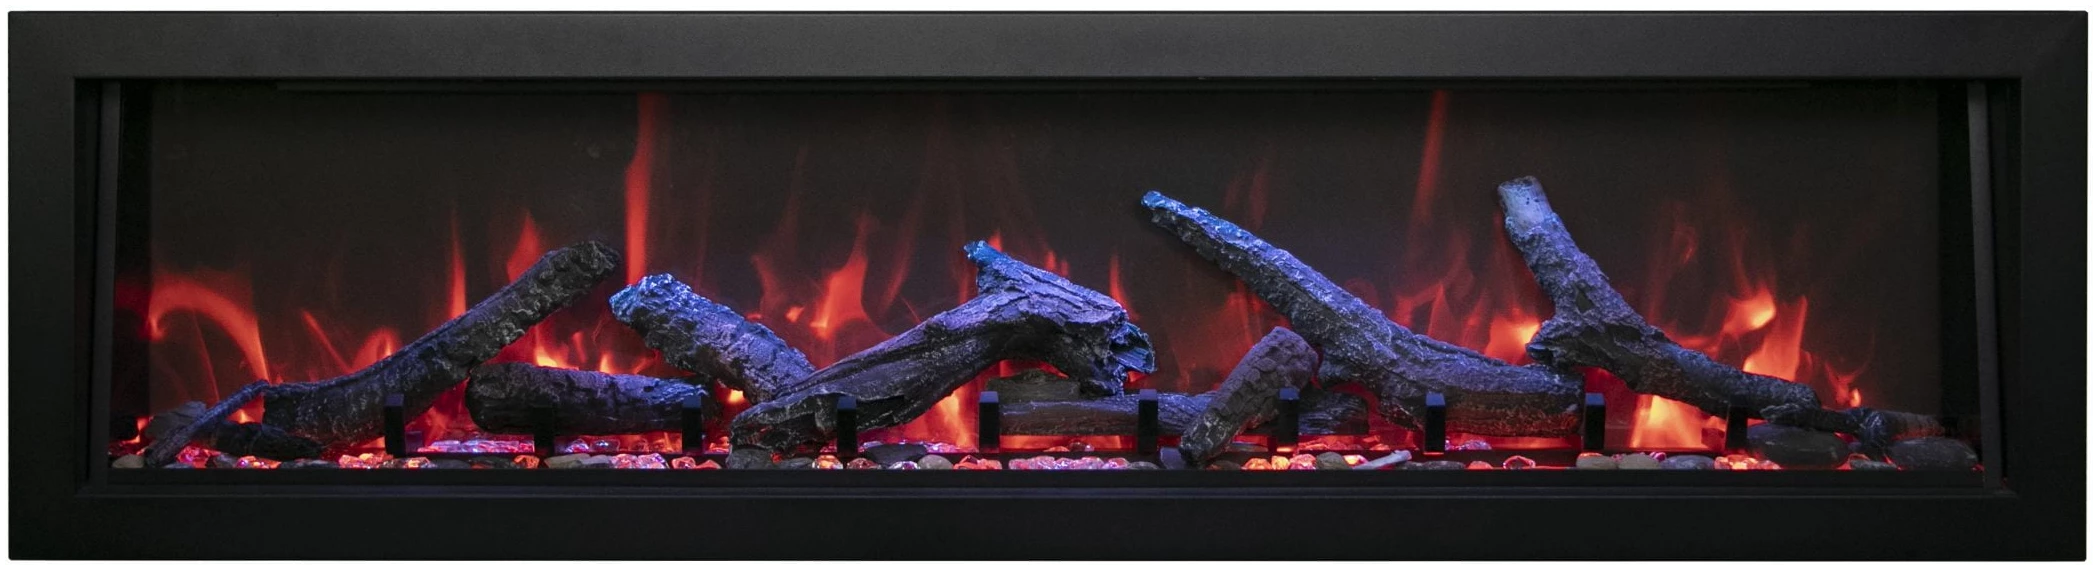 Amantii Panorama Built-in Only Deep w/ Optional Black Steel Surround Electric Fireplace